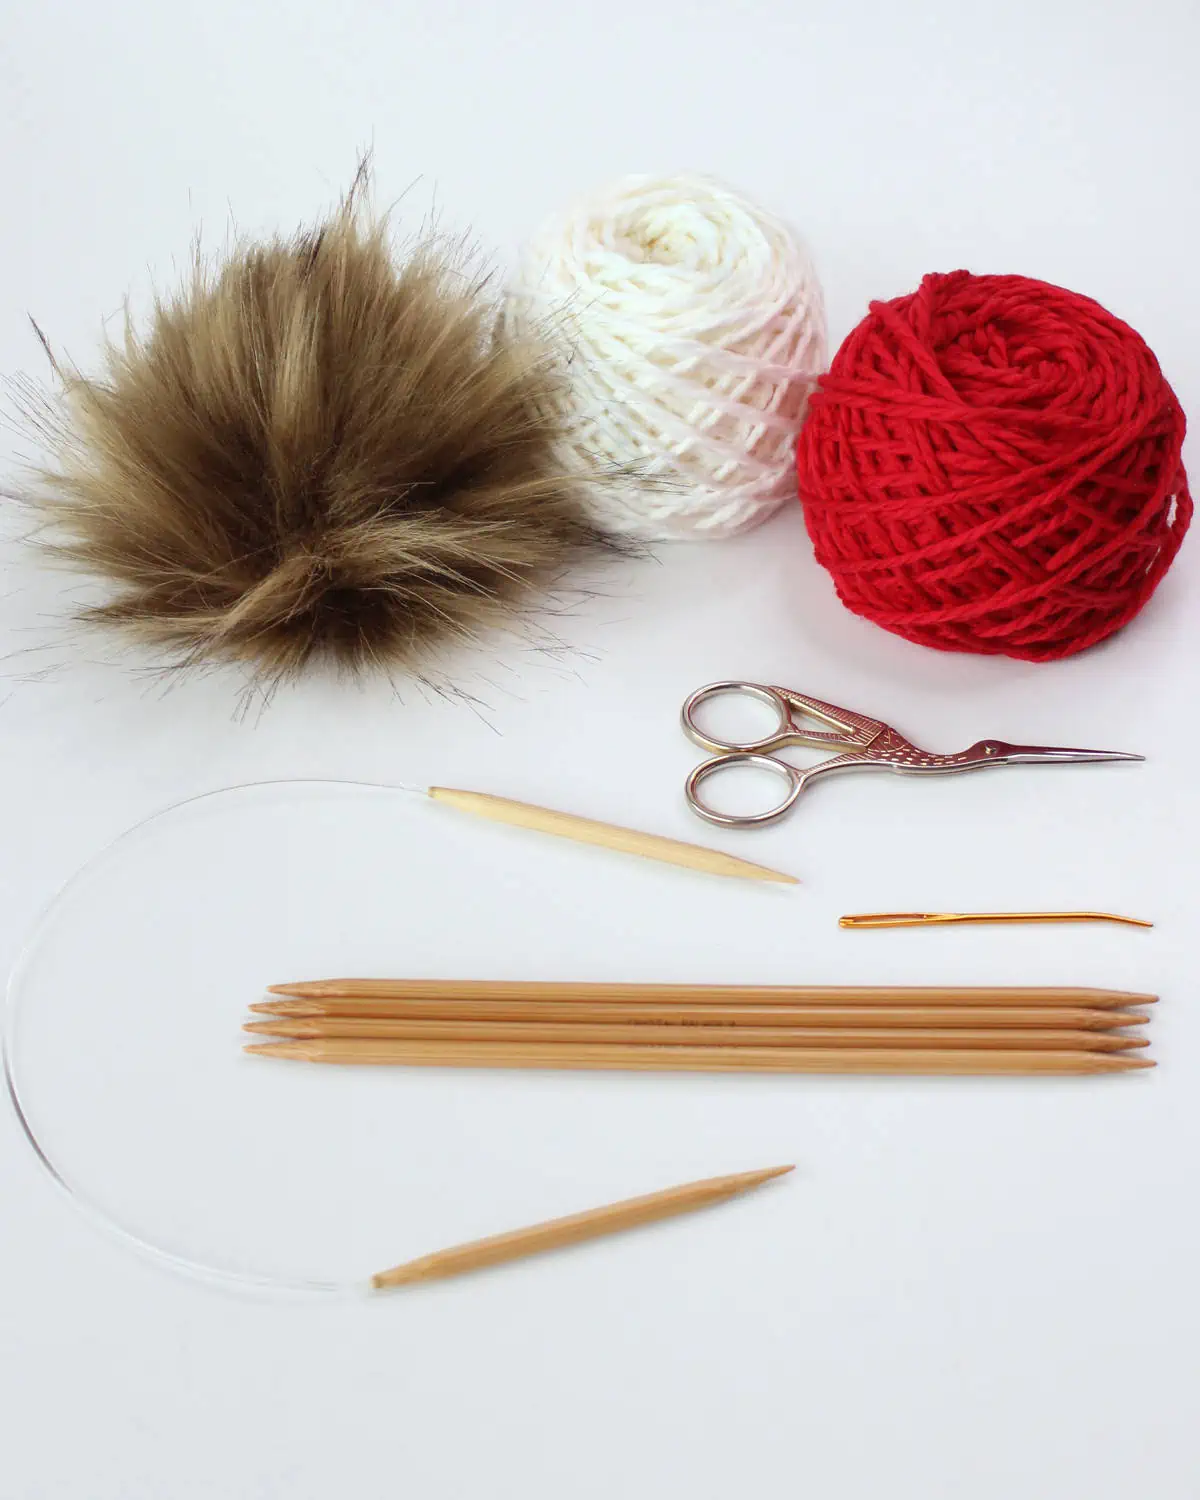 Knitting supplies include faux fur pom pom, red and white yarn, scissors, circular needle, double-pointed needles, and a tapestry needle.